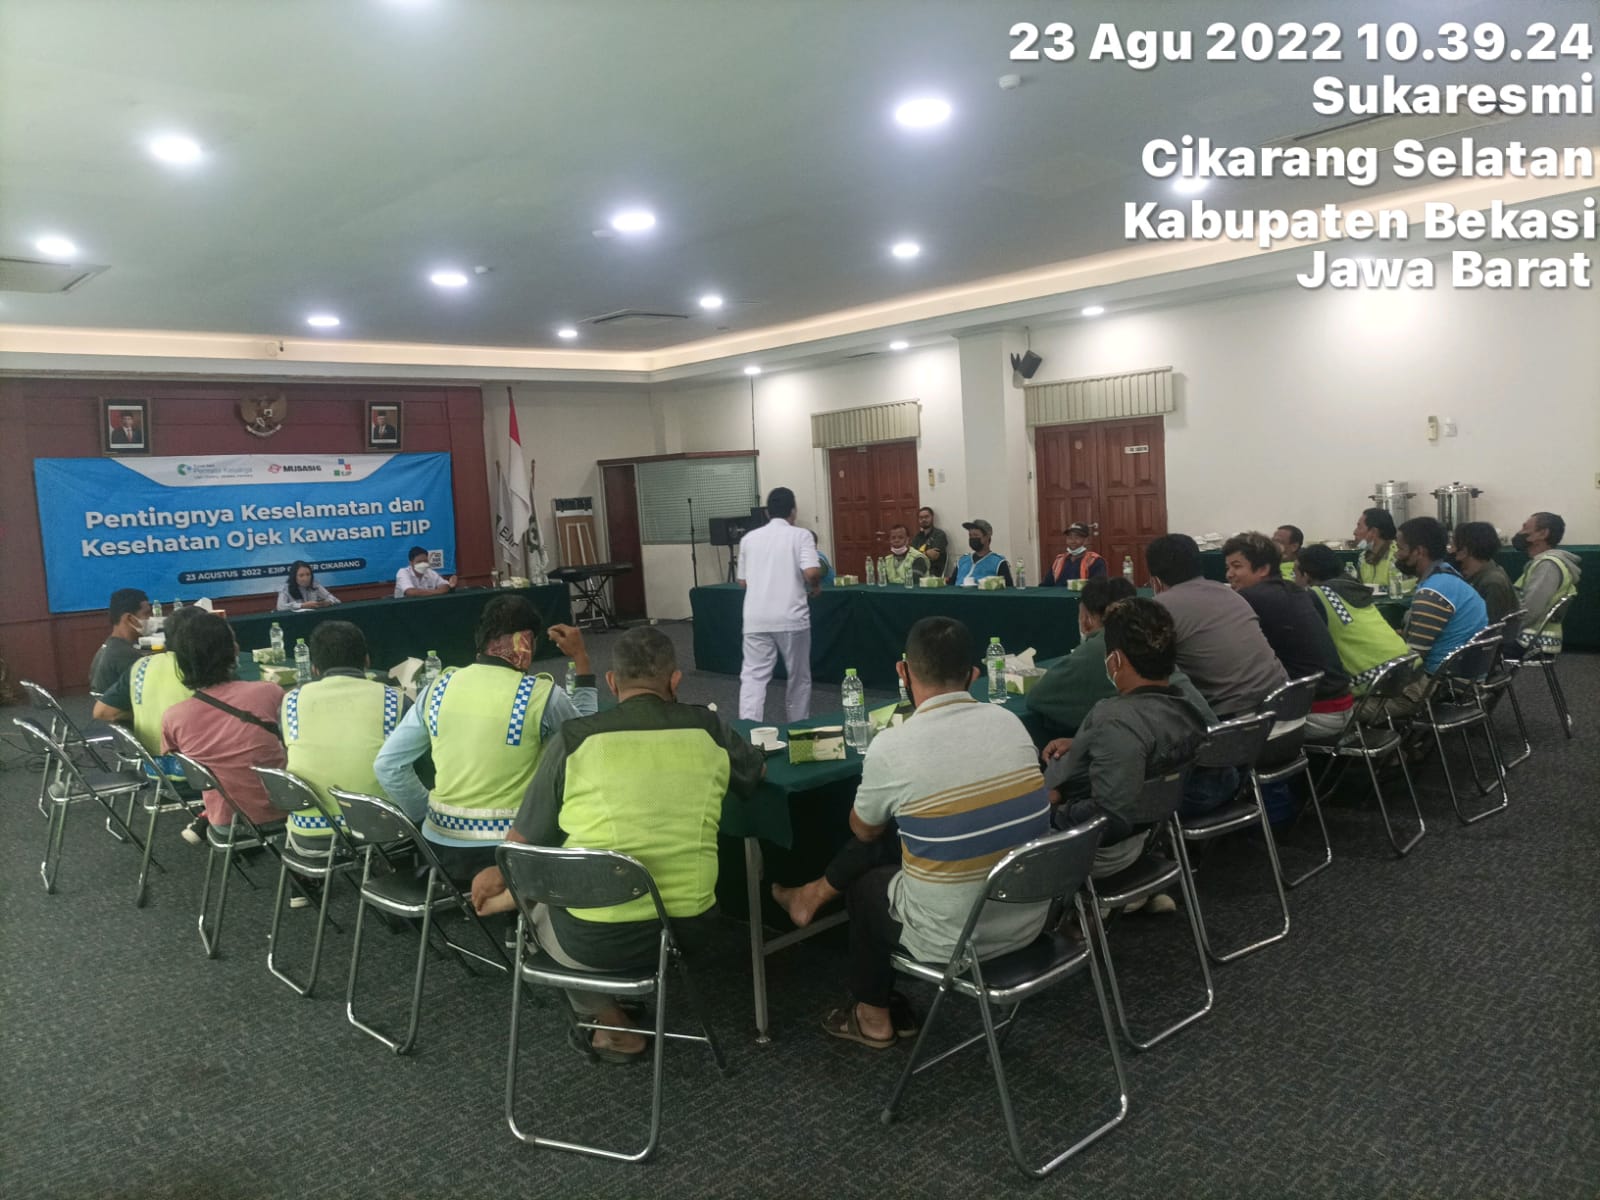 EJIP Medical/Heatlh CSR : Socialization on theme “The importance of safety and health of Taxibike (Ojek) in EJIP surroundings